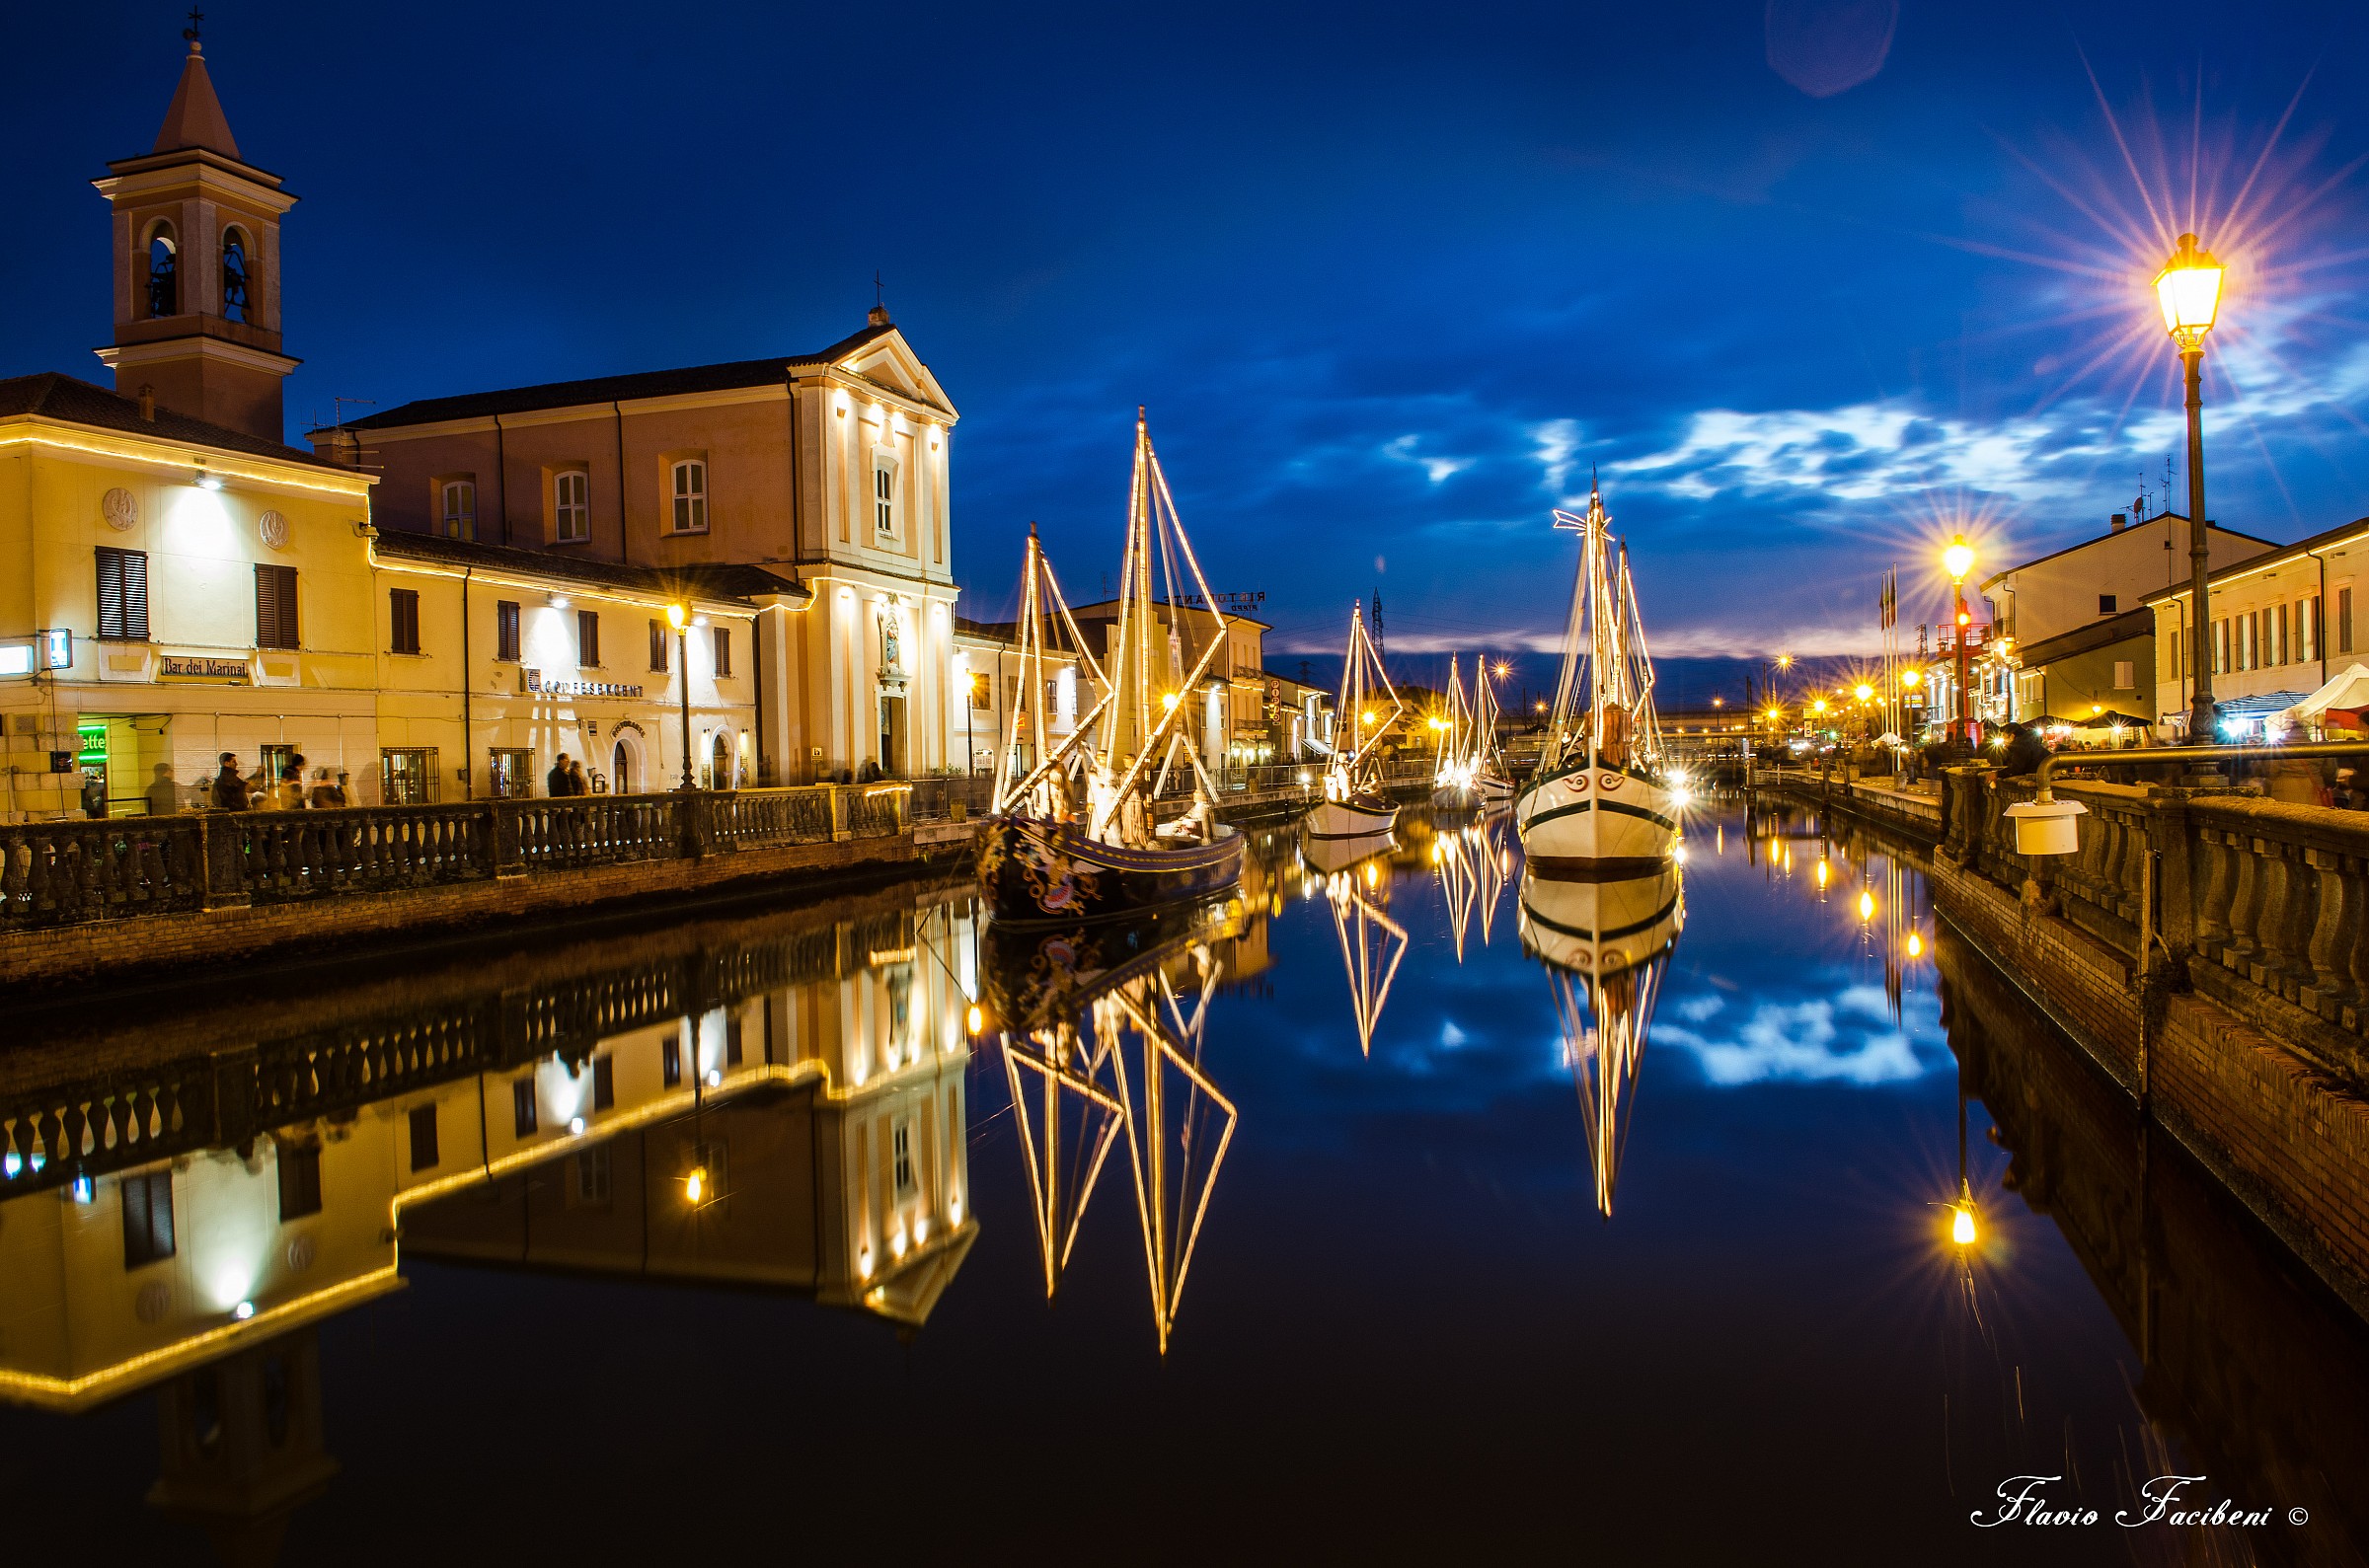 The crib of Cesenatico at the blue hour...